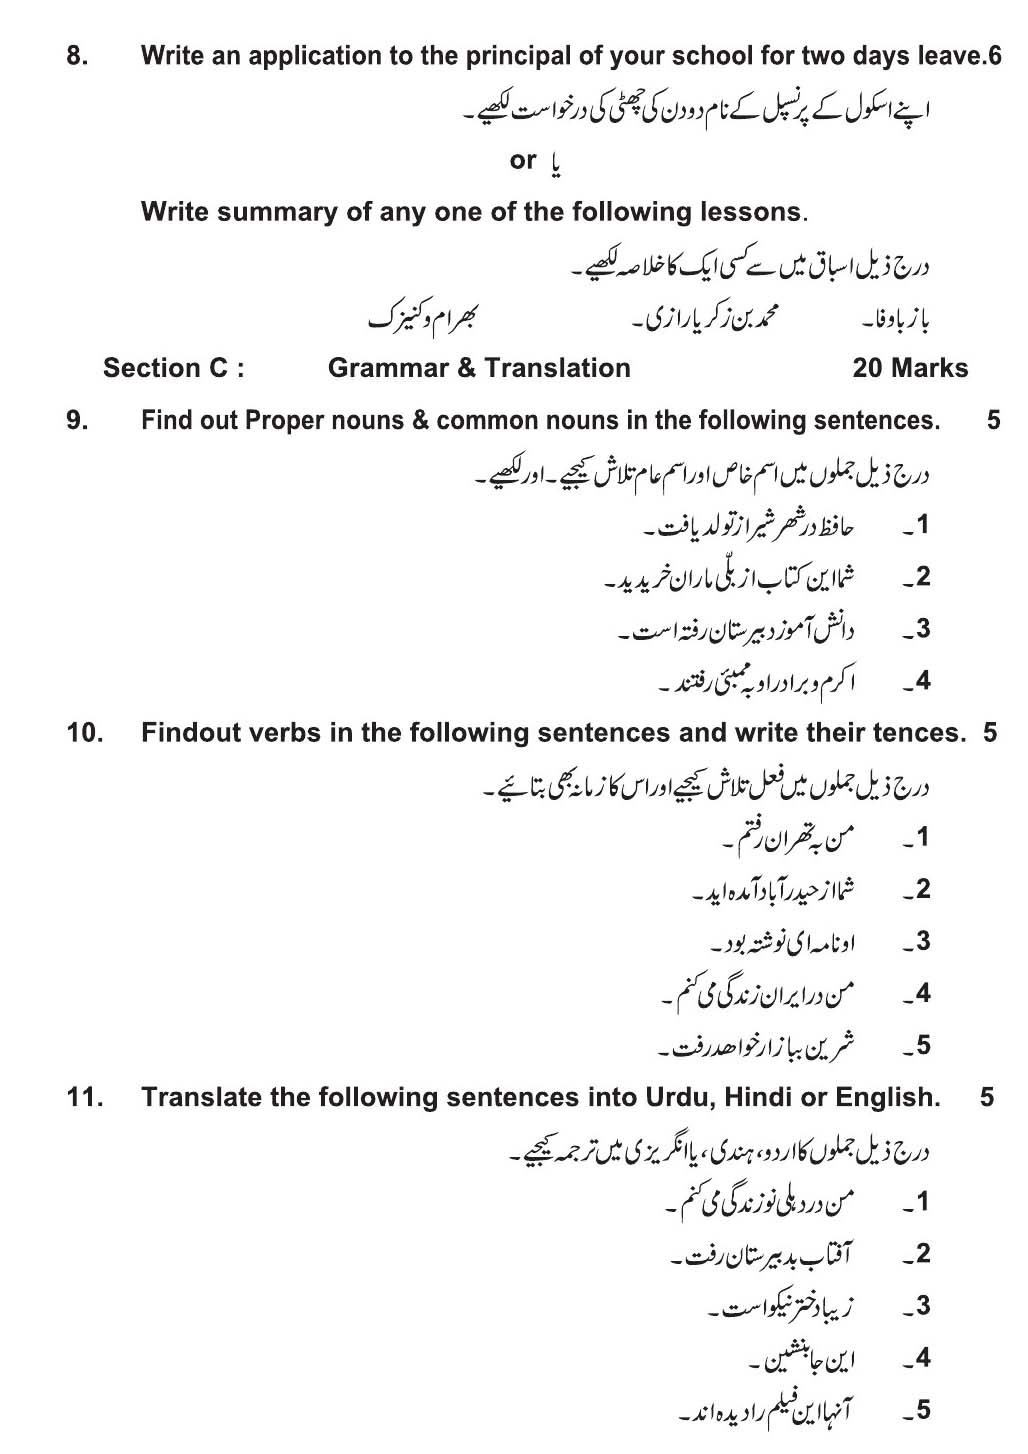 Persian CBSE Class X Sample Question Paper 2018-19 - Image 2